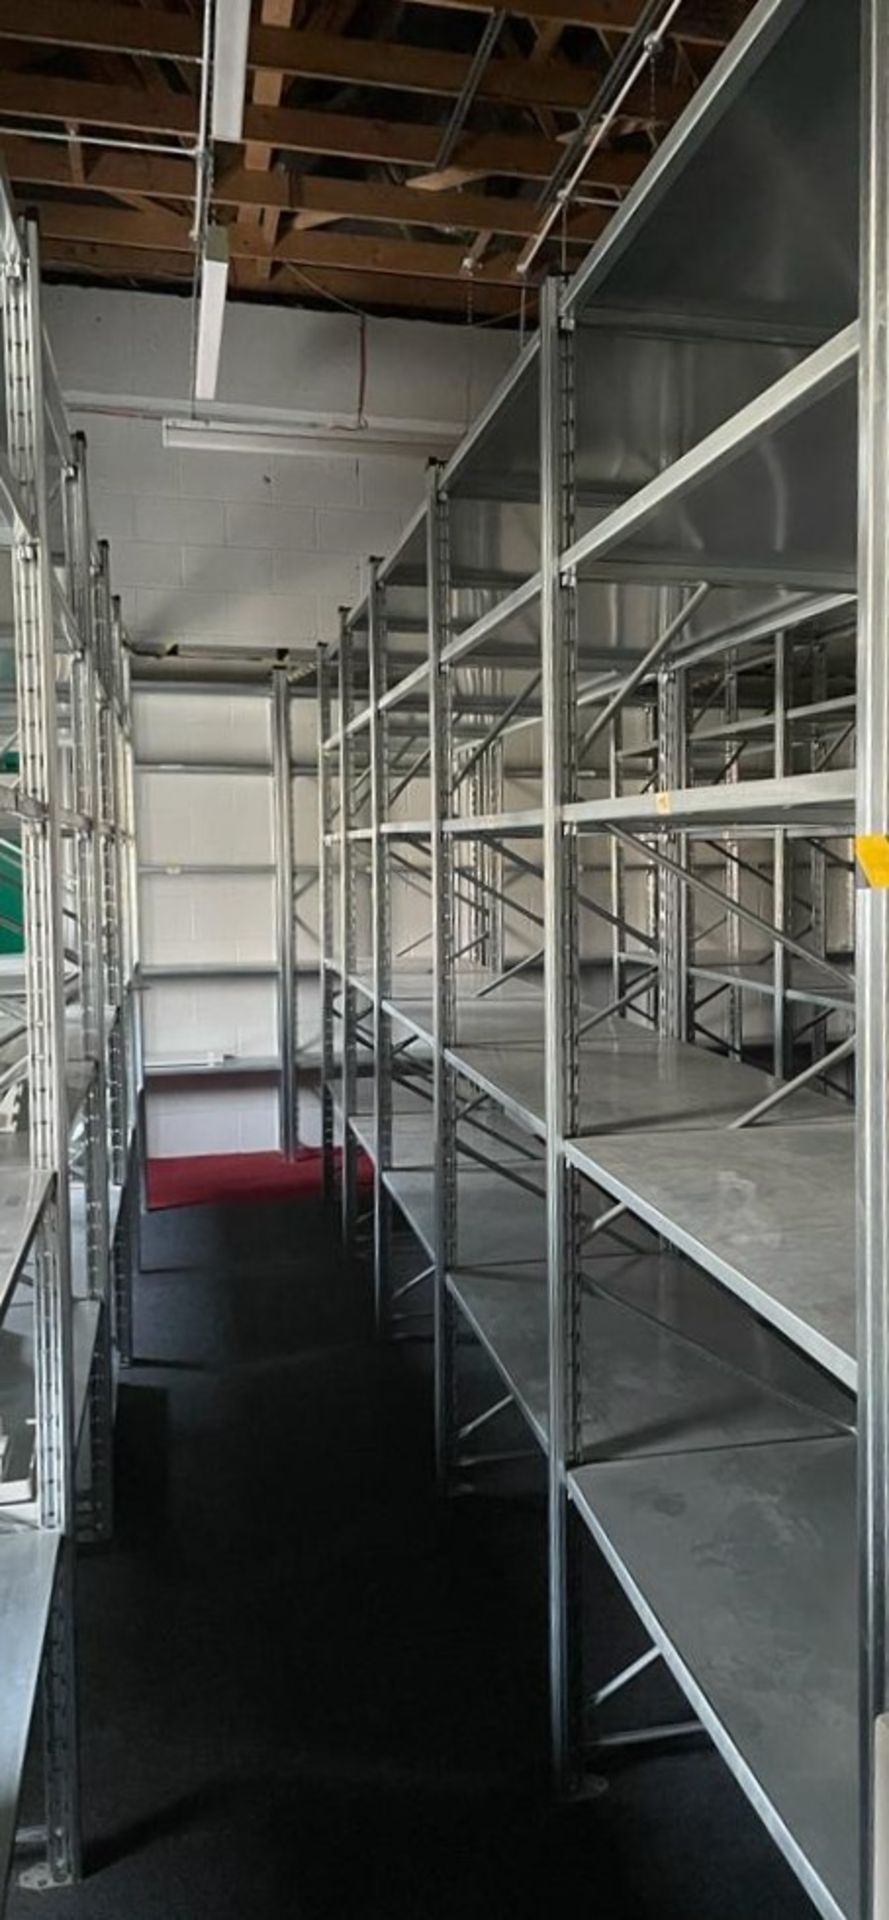 12 x Bays of High Quality Galvanised Steel Warehouse Shelving - Bay Dimensions: H250 x W100 x D60 - Image 6 of 12